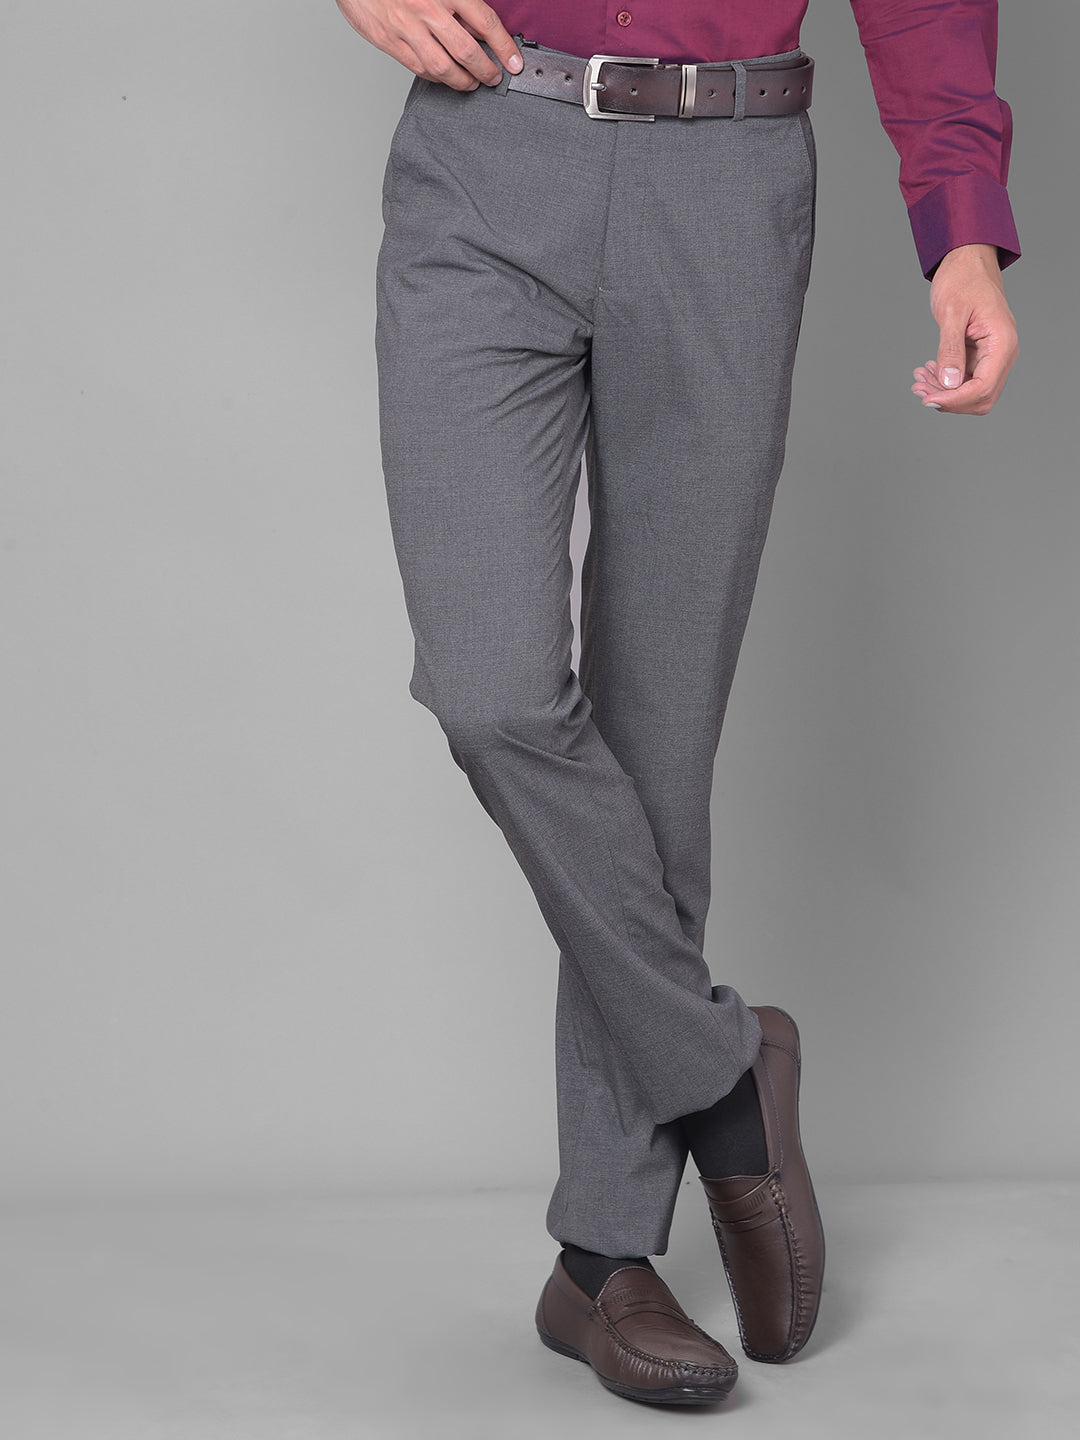 10 Grey Shirt Matching Pant Combination for Men 2023 - The Men Cure